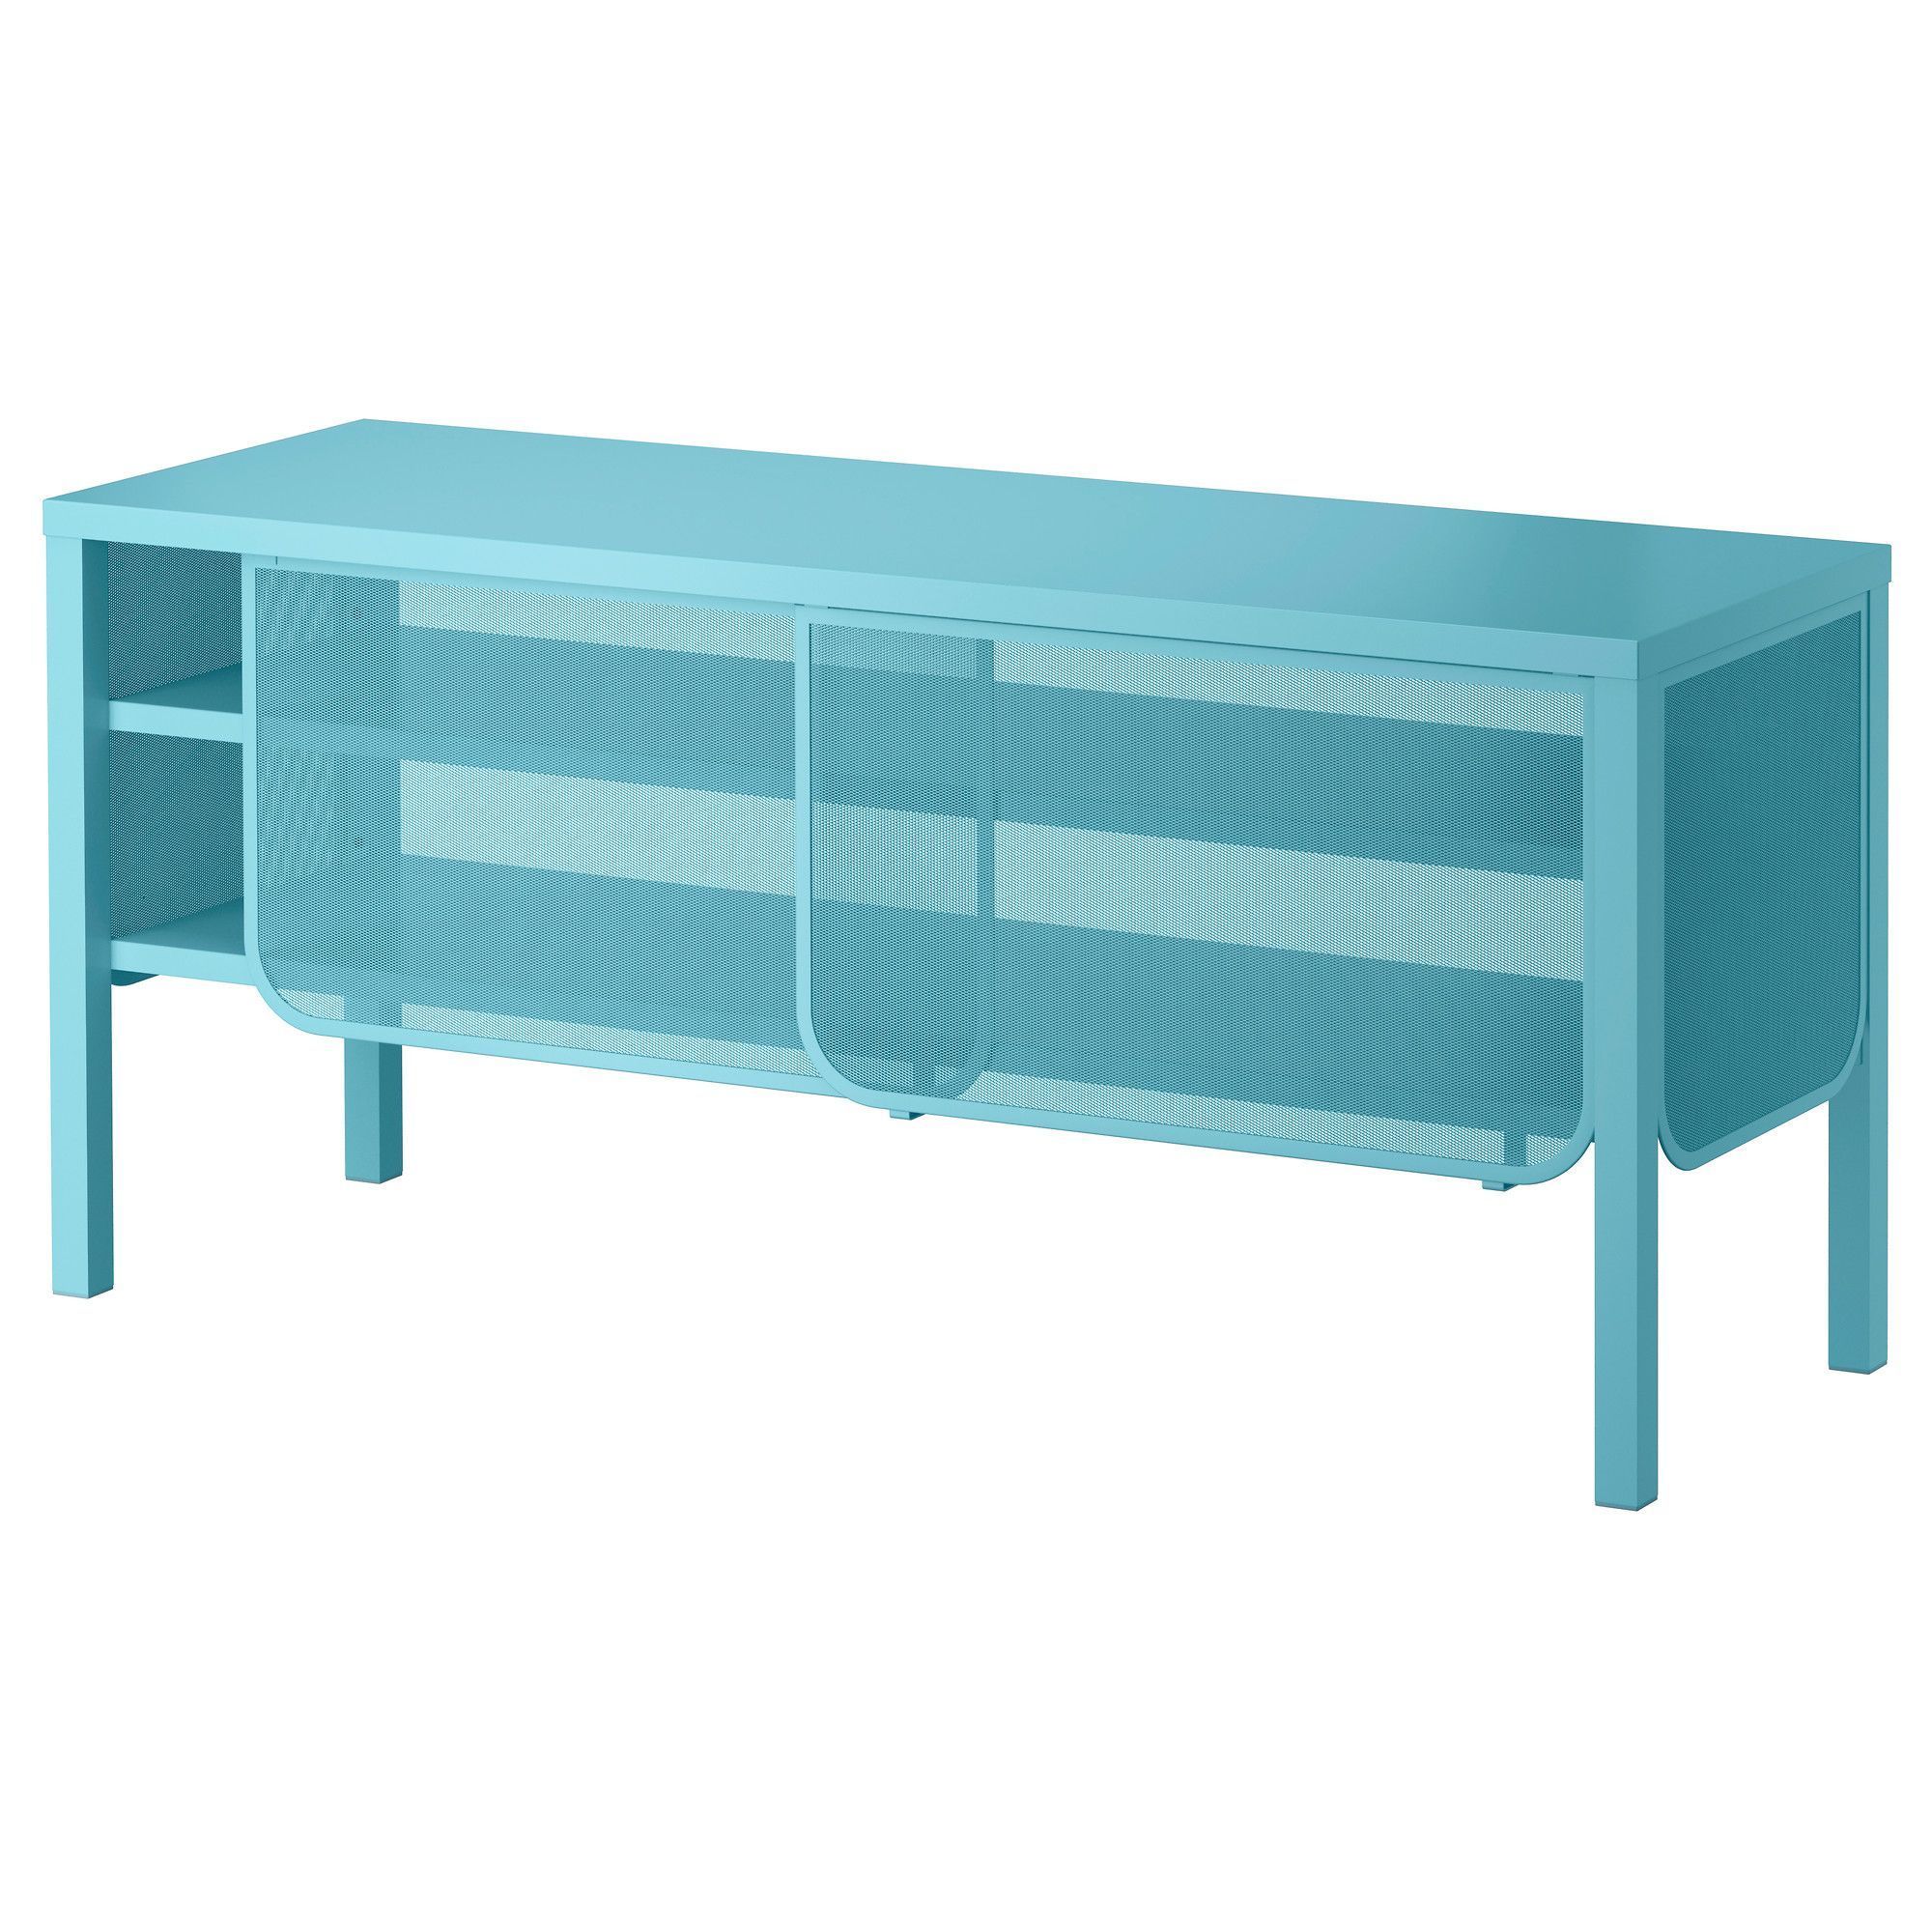 Ikea Metal Blue Tv Stand – Google Search In 2020 | Ikea Pertaining To Blue Tv Stands (View 8 of 15)